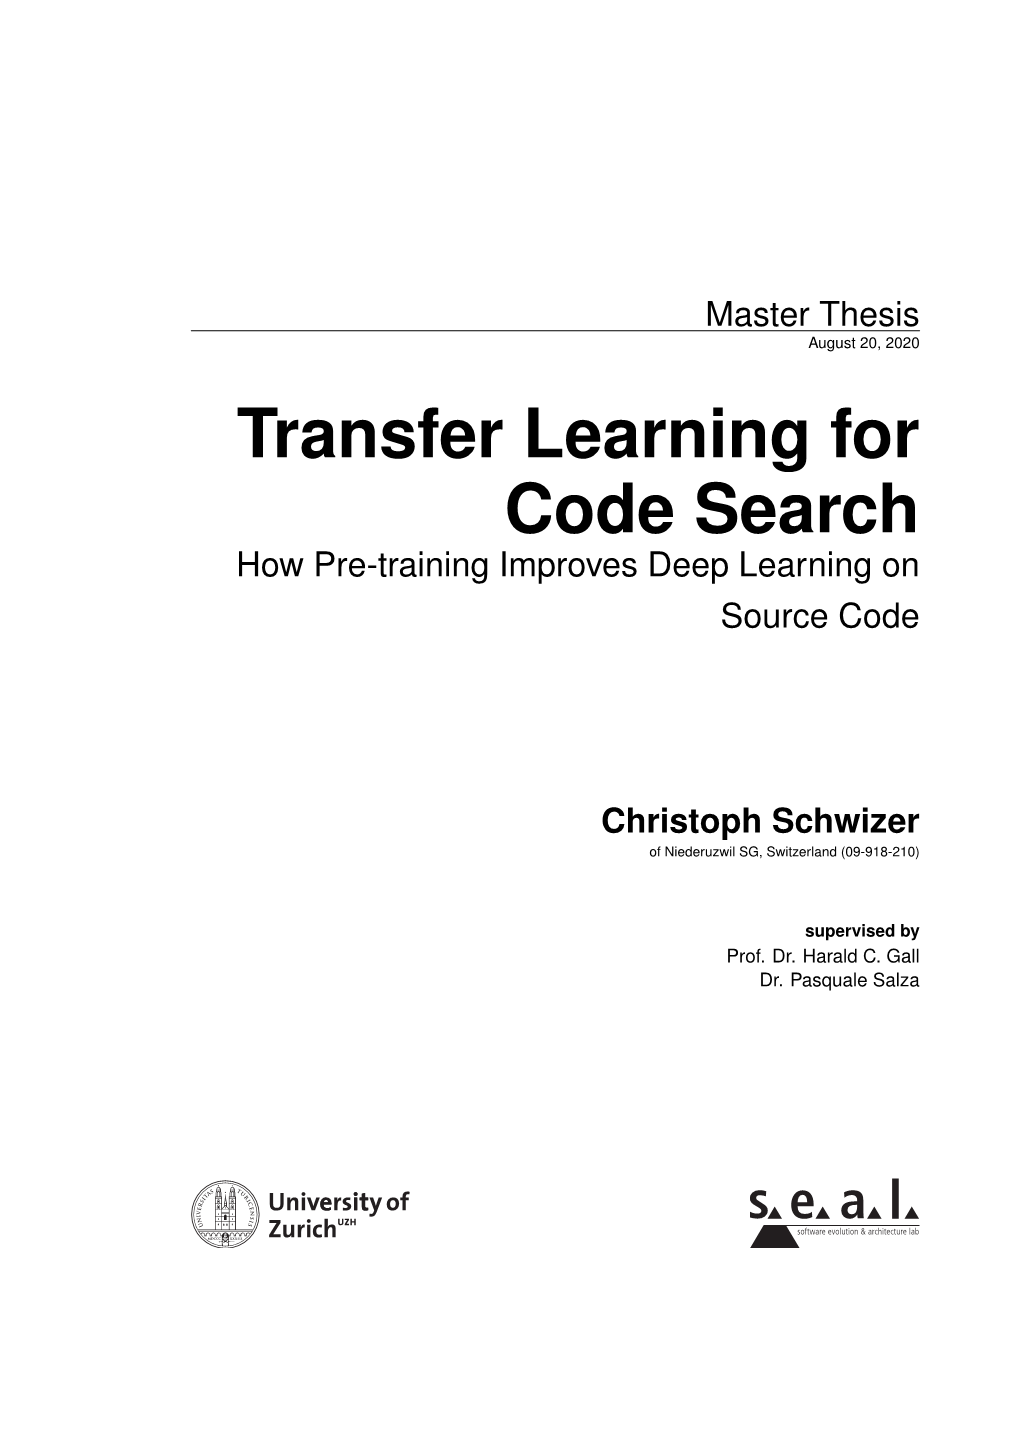 Transfer Learning for Code Search How Pre-Training Improves Deep Learning on Source Code